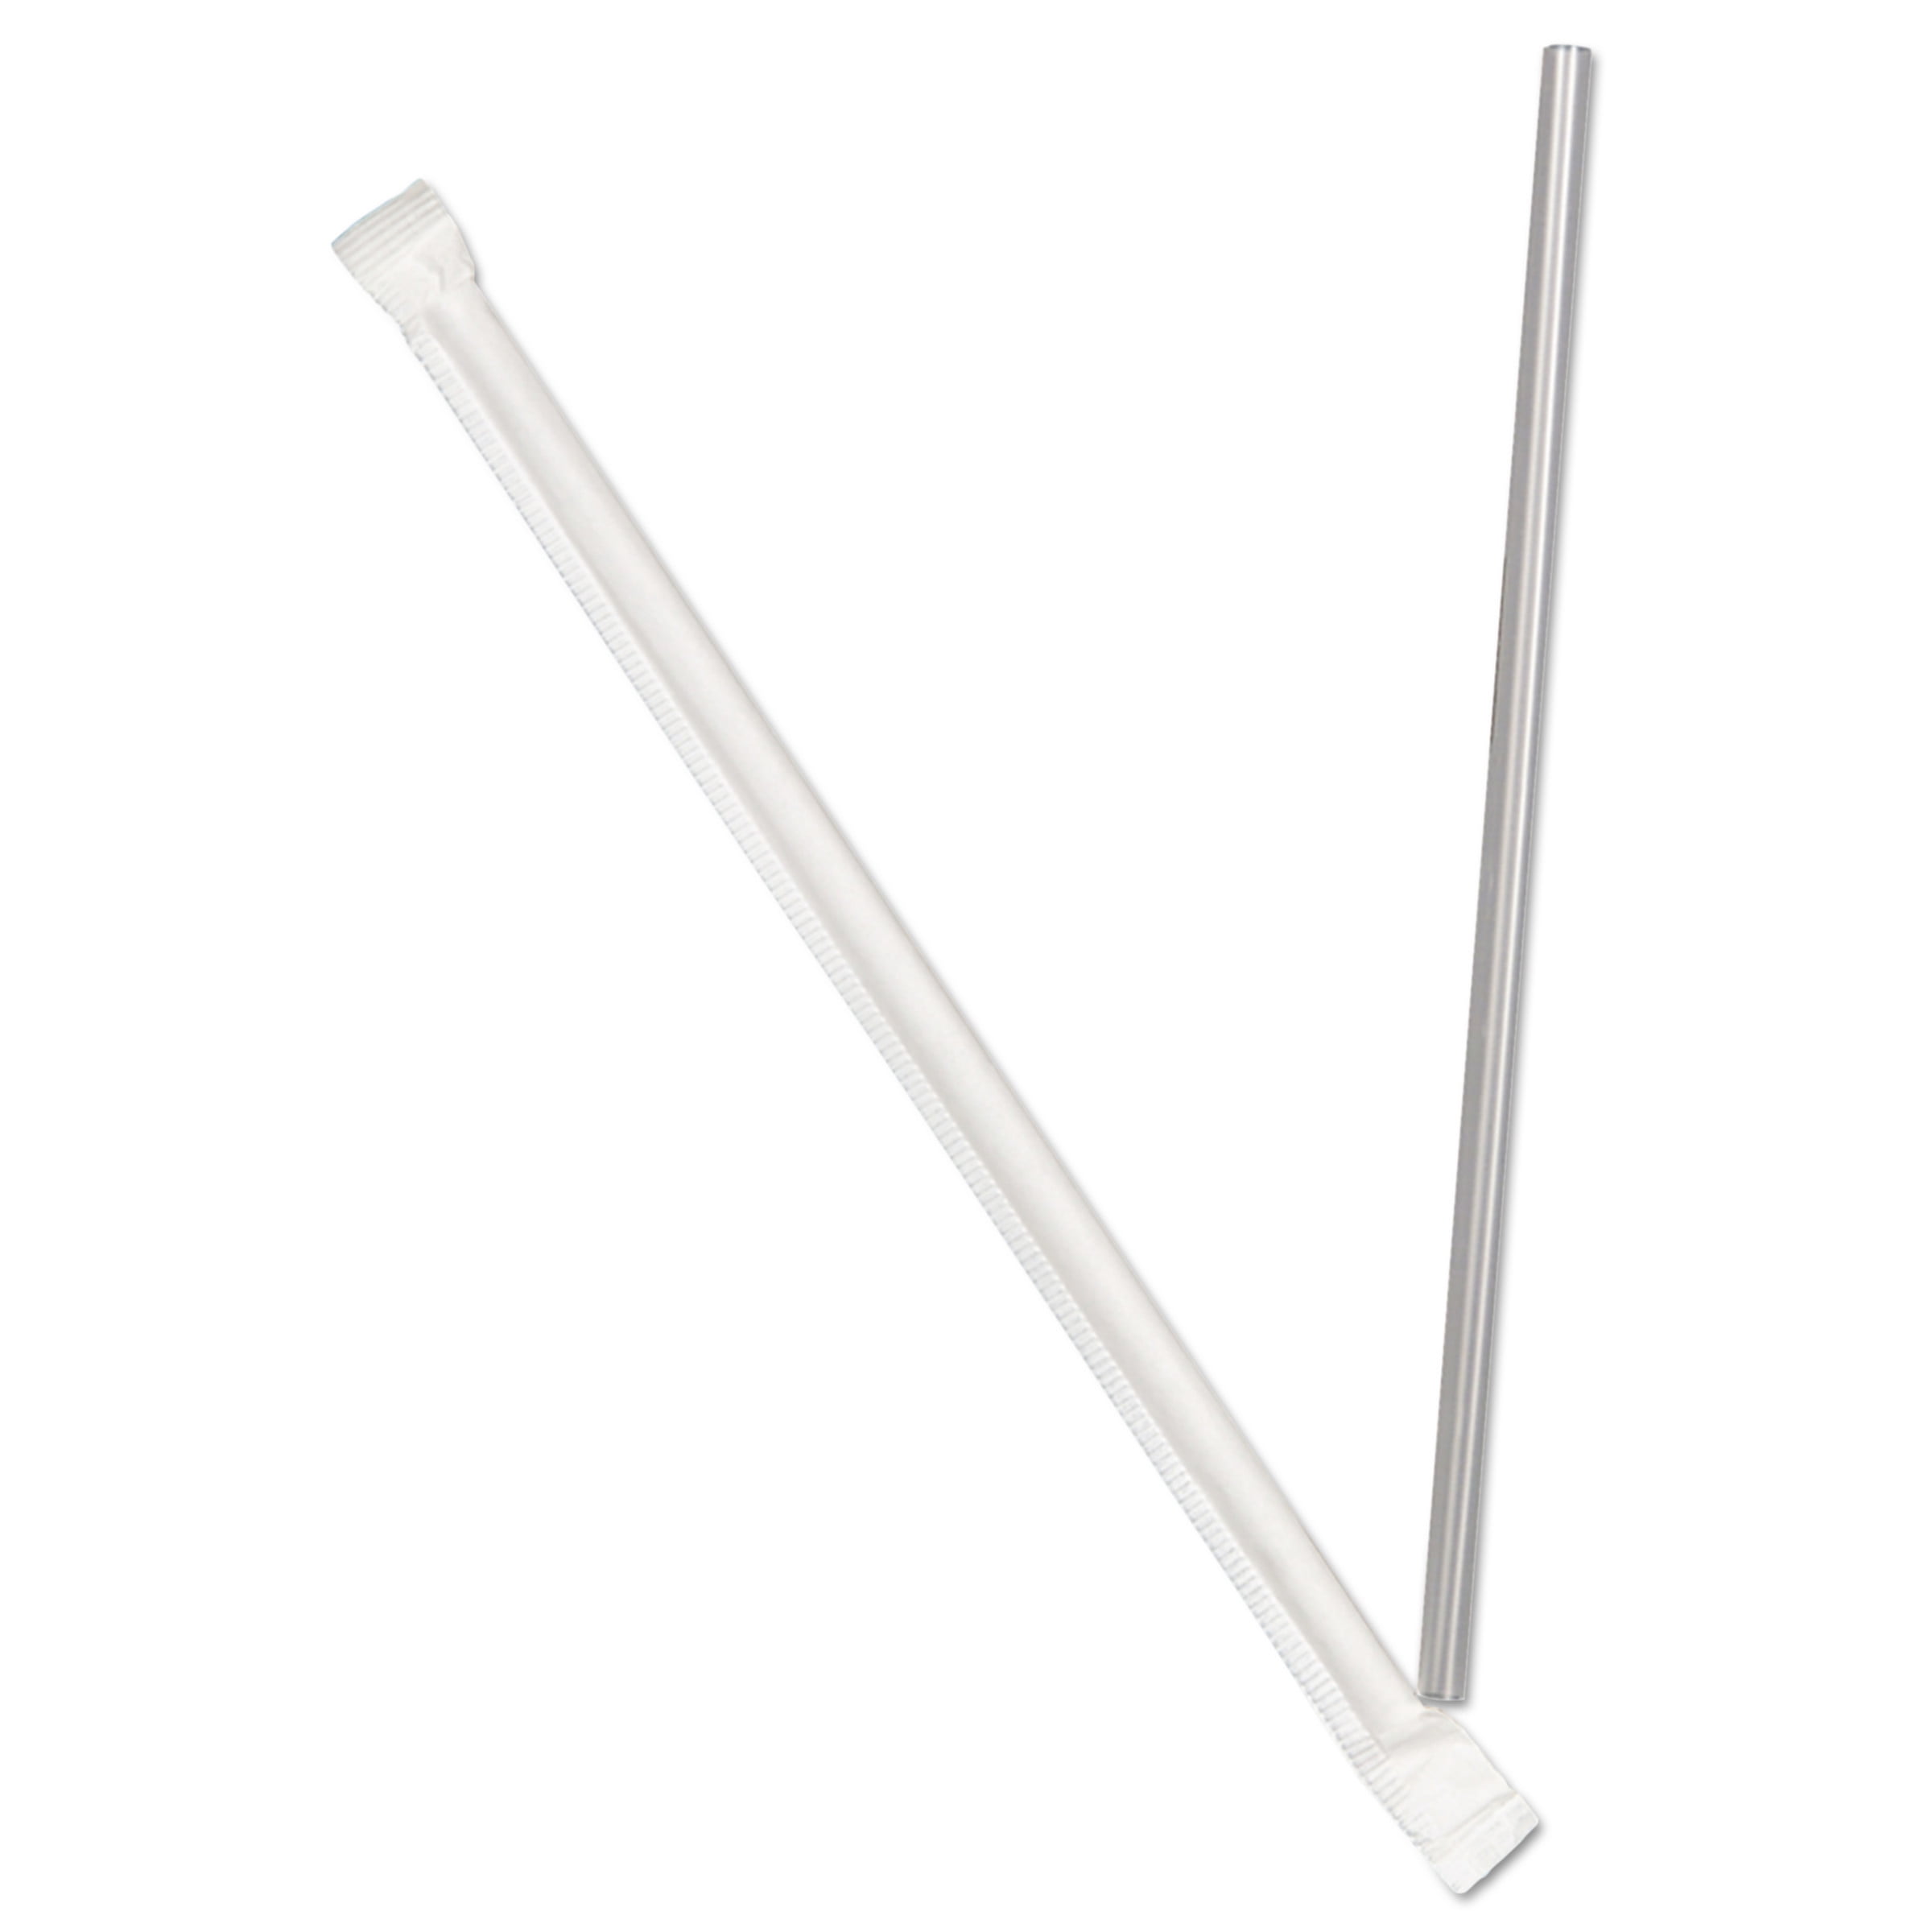 Jumbo Clear Straws - 500 Count by Mann Lake